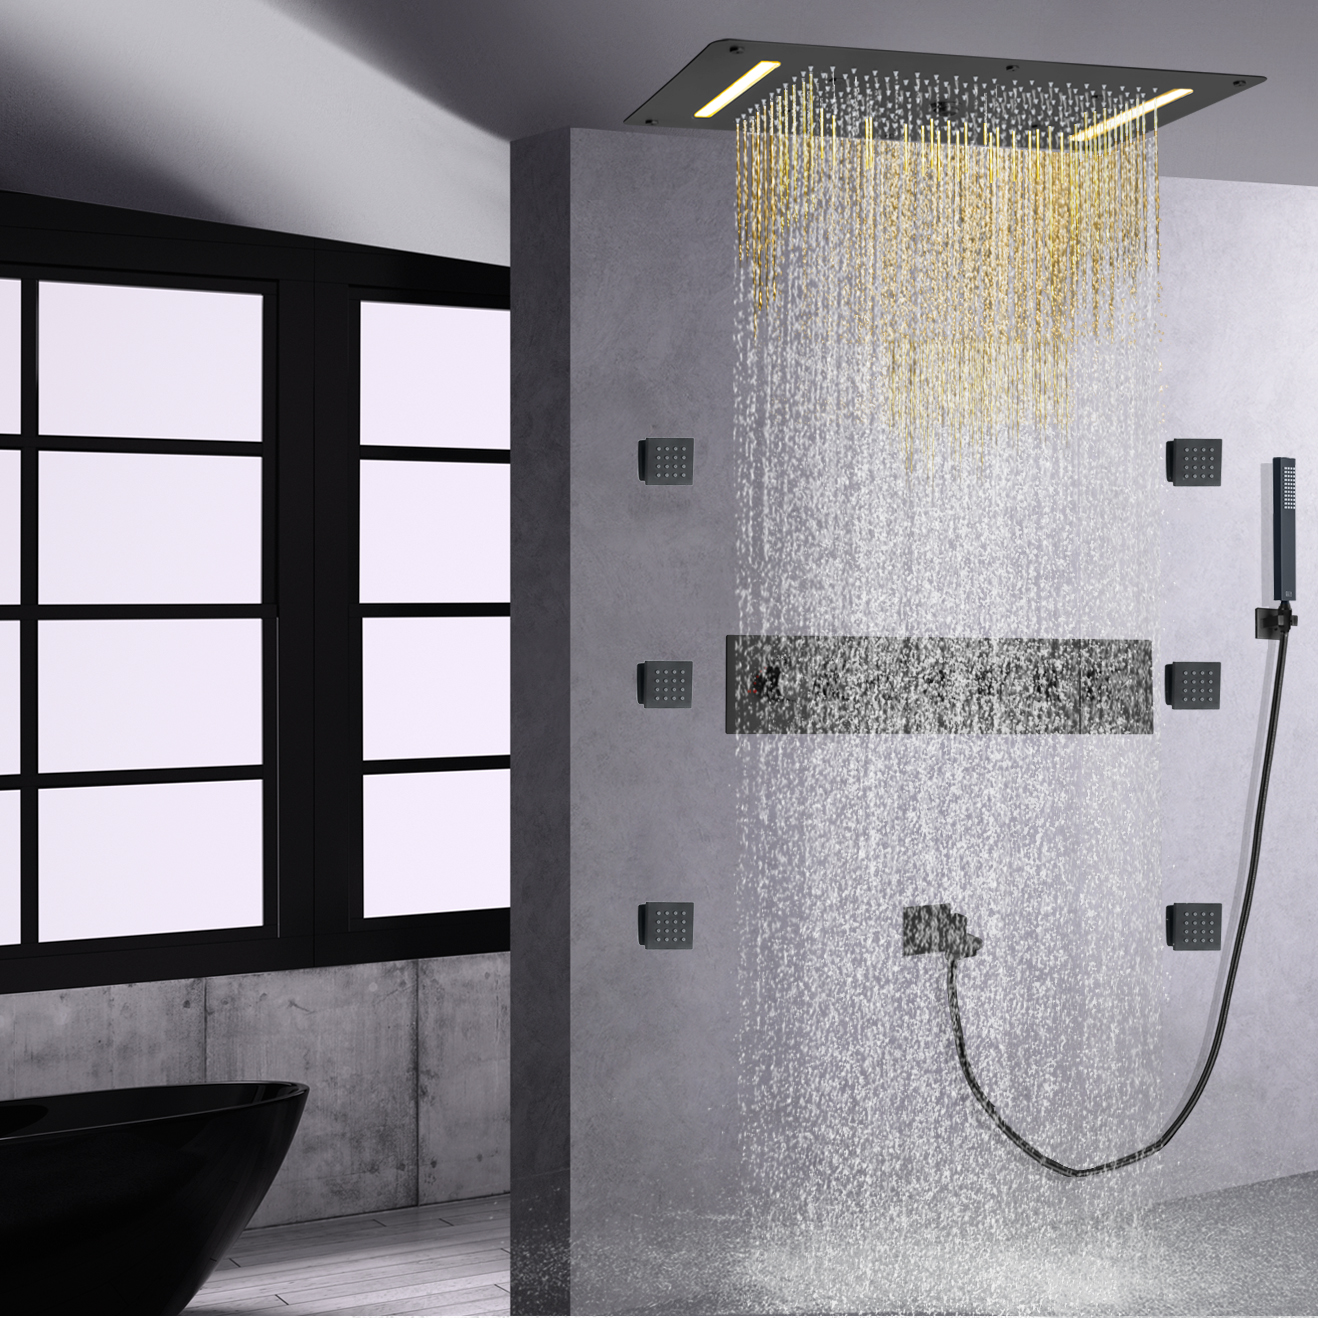 Matte Black LED Thermostatic High Flow Shower Mixer Set Wall Mount Concealed Waterfall Mist Rain Handheld Massage